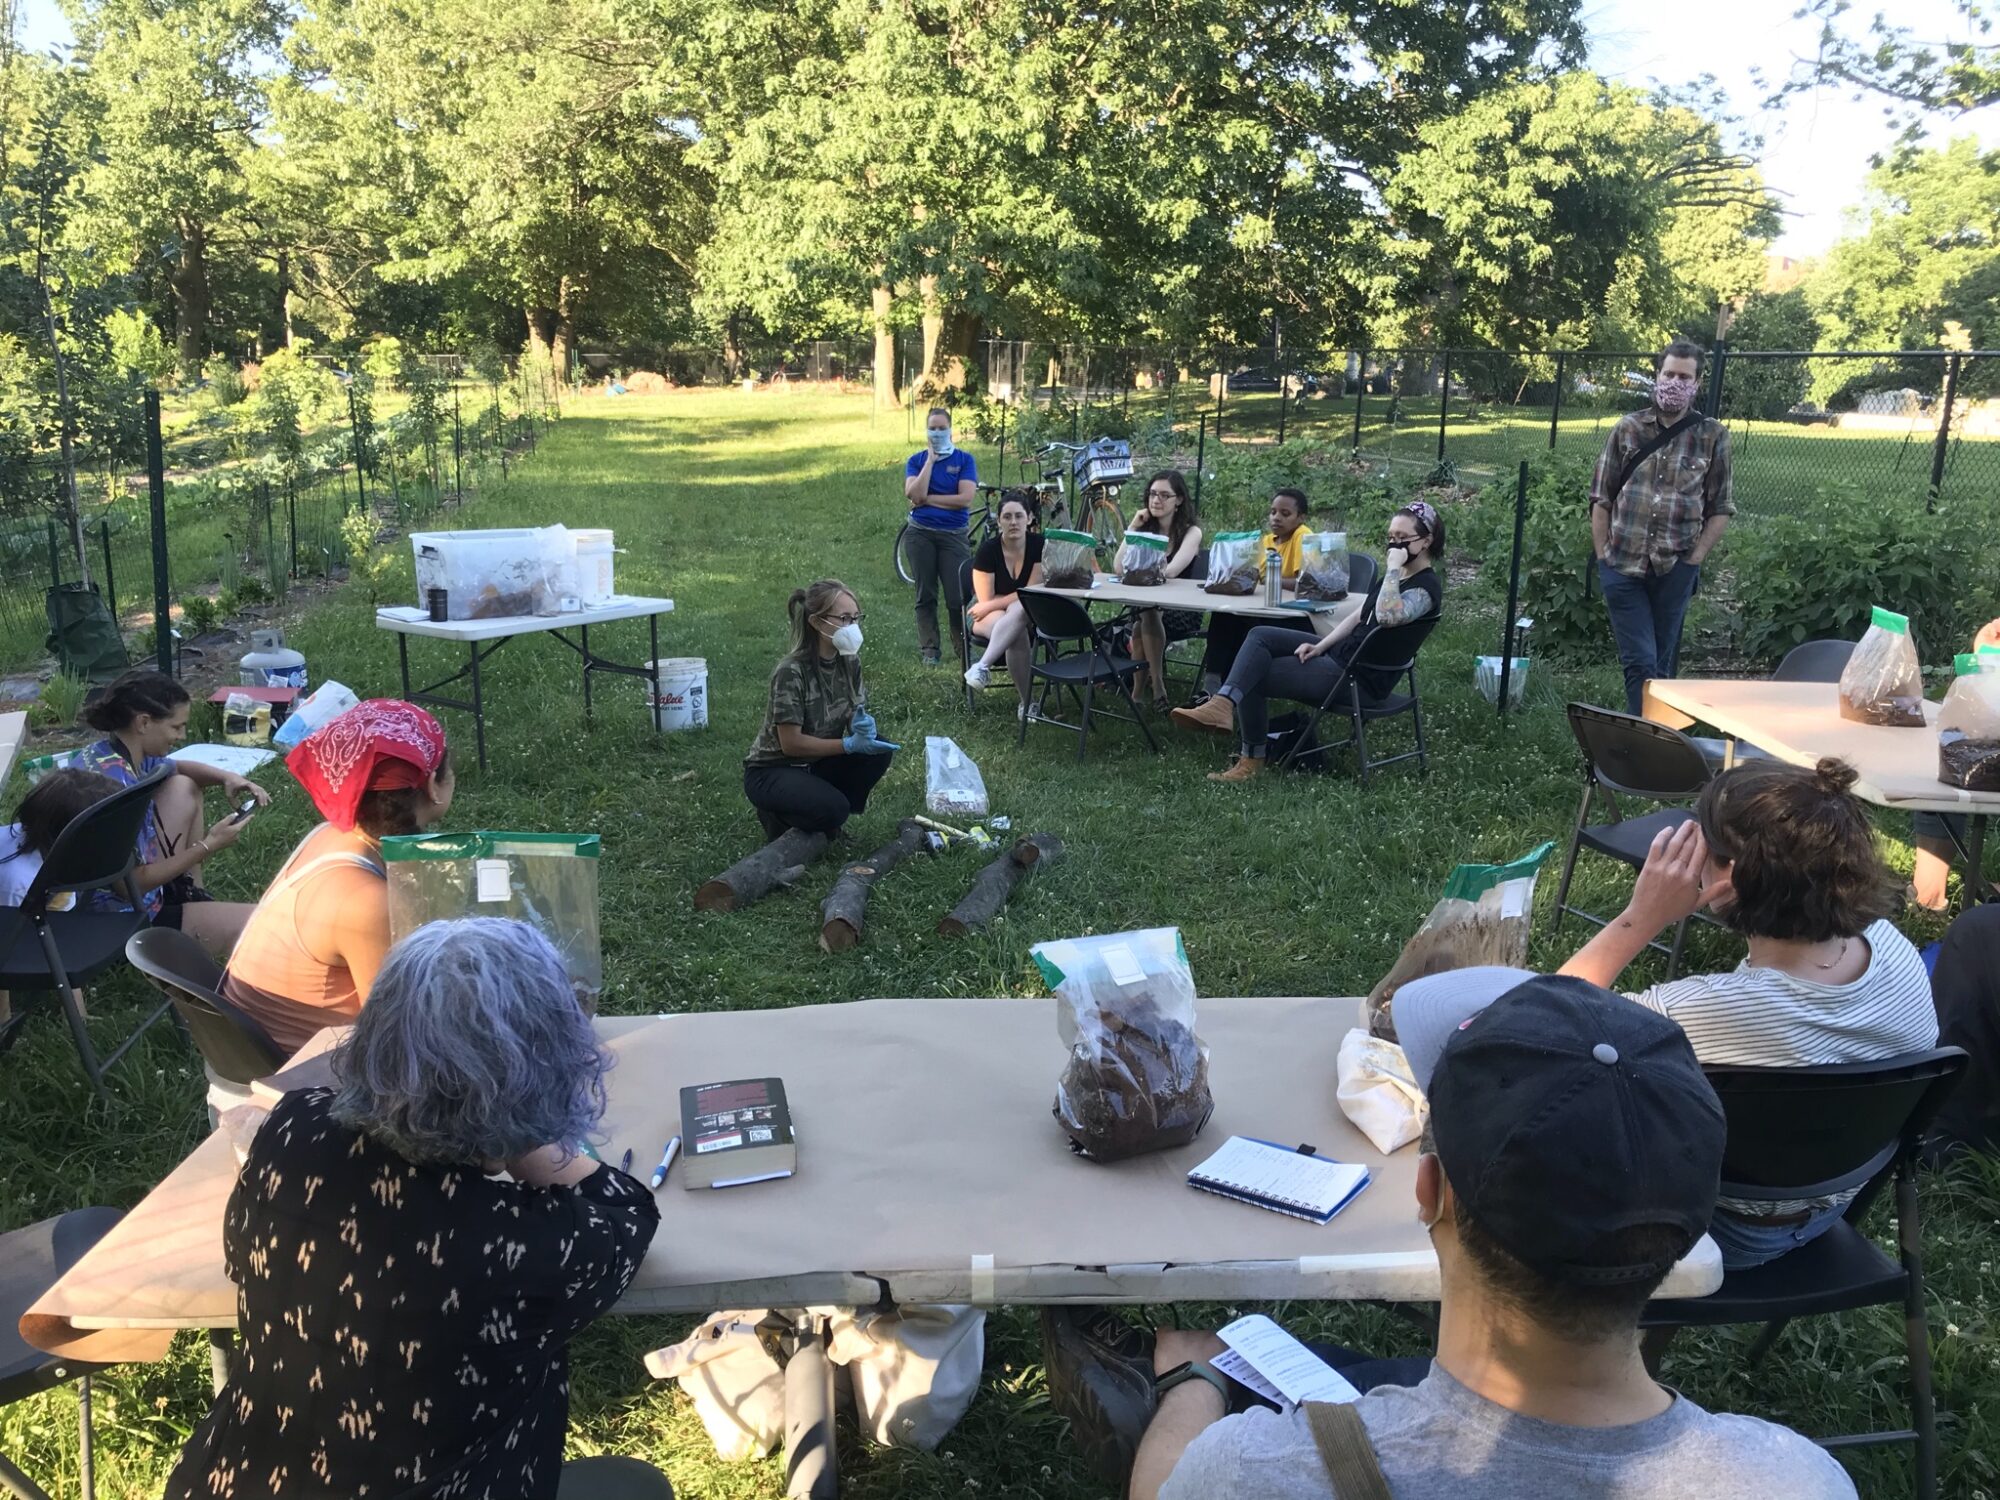 People gathered at the learning orchard for a workshop